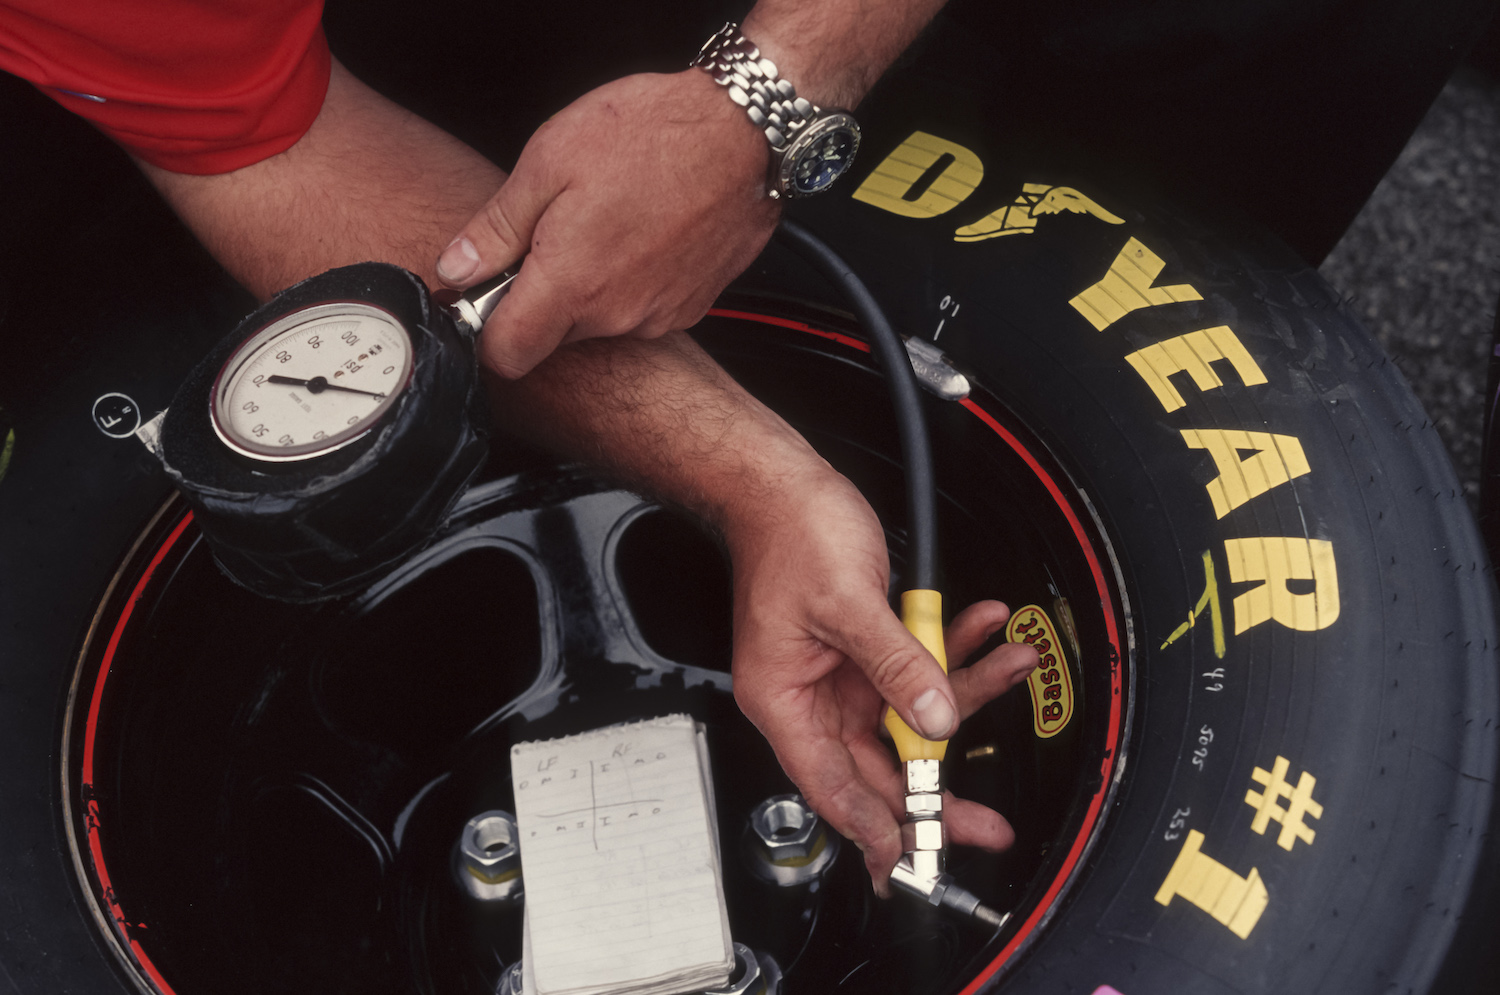 The hands of a NASCAR technician checking the psi of a Good Year racing tire with an air pressure gauge.